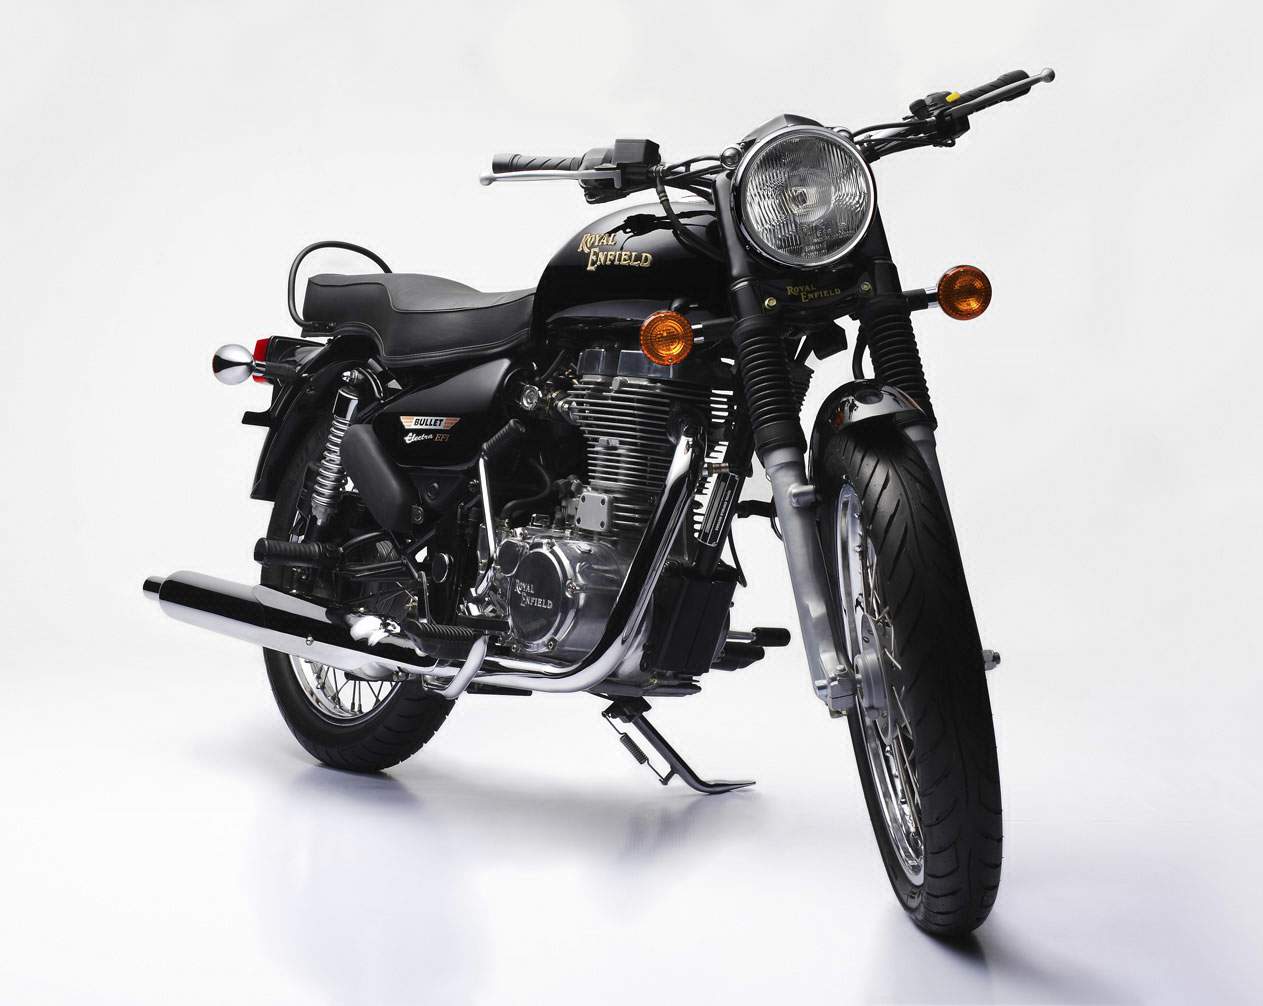 Royal Enfield Bullet Classic 500 technical specifications